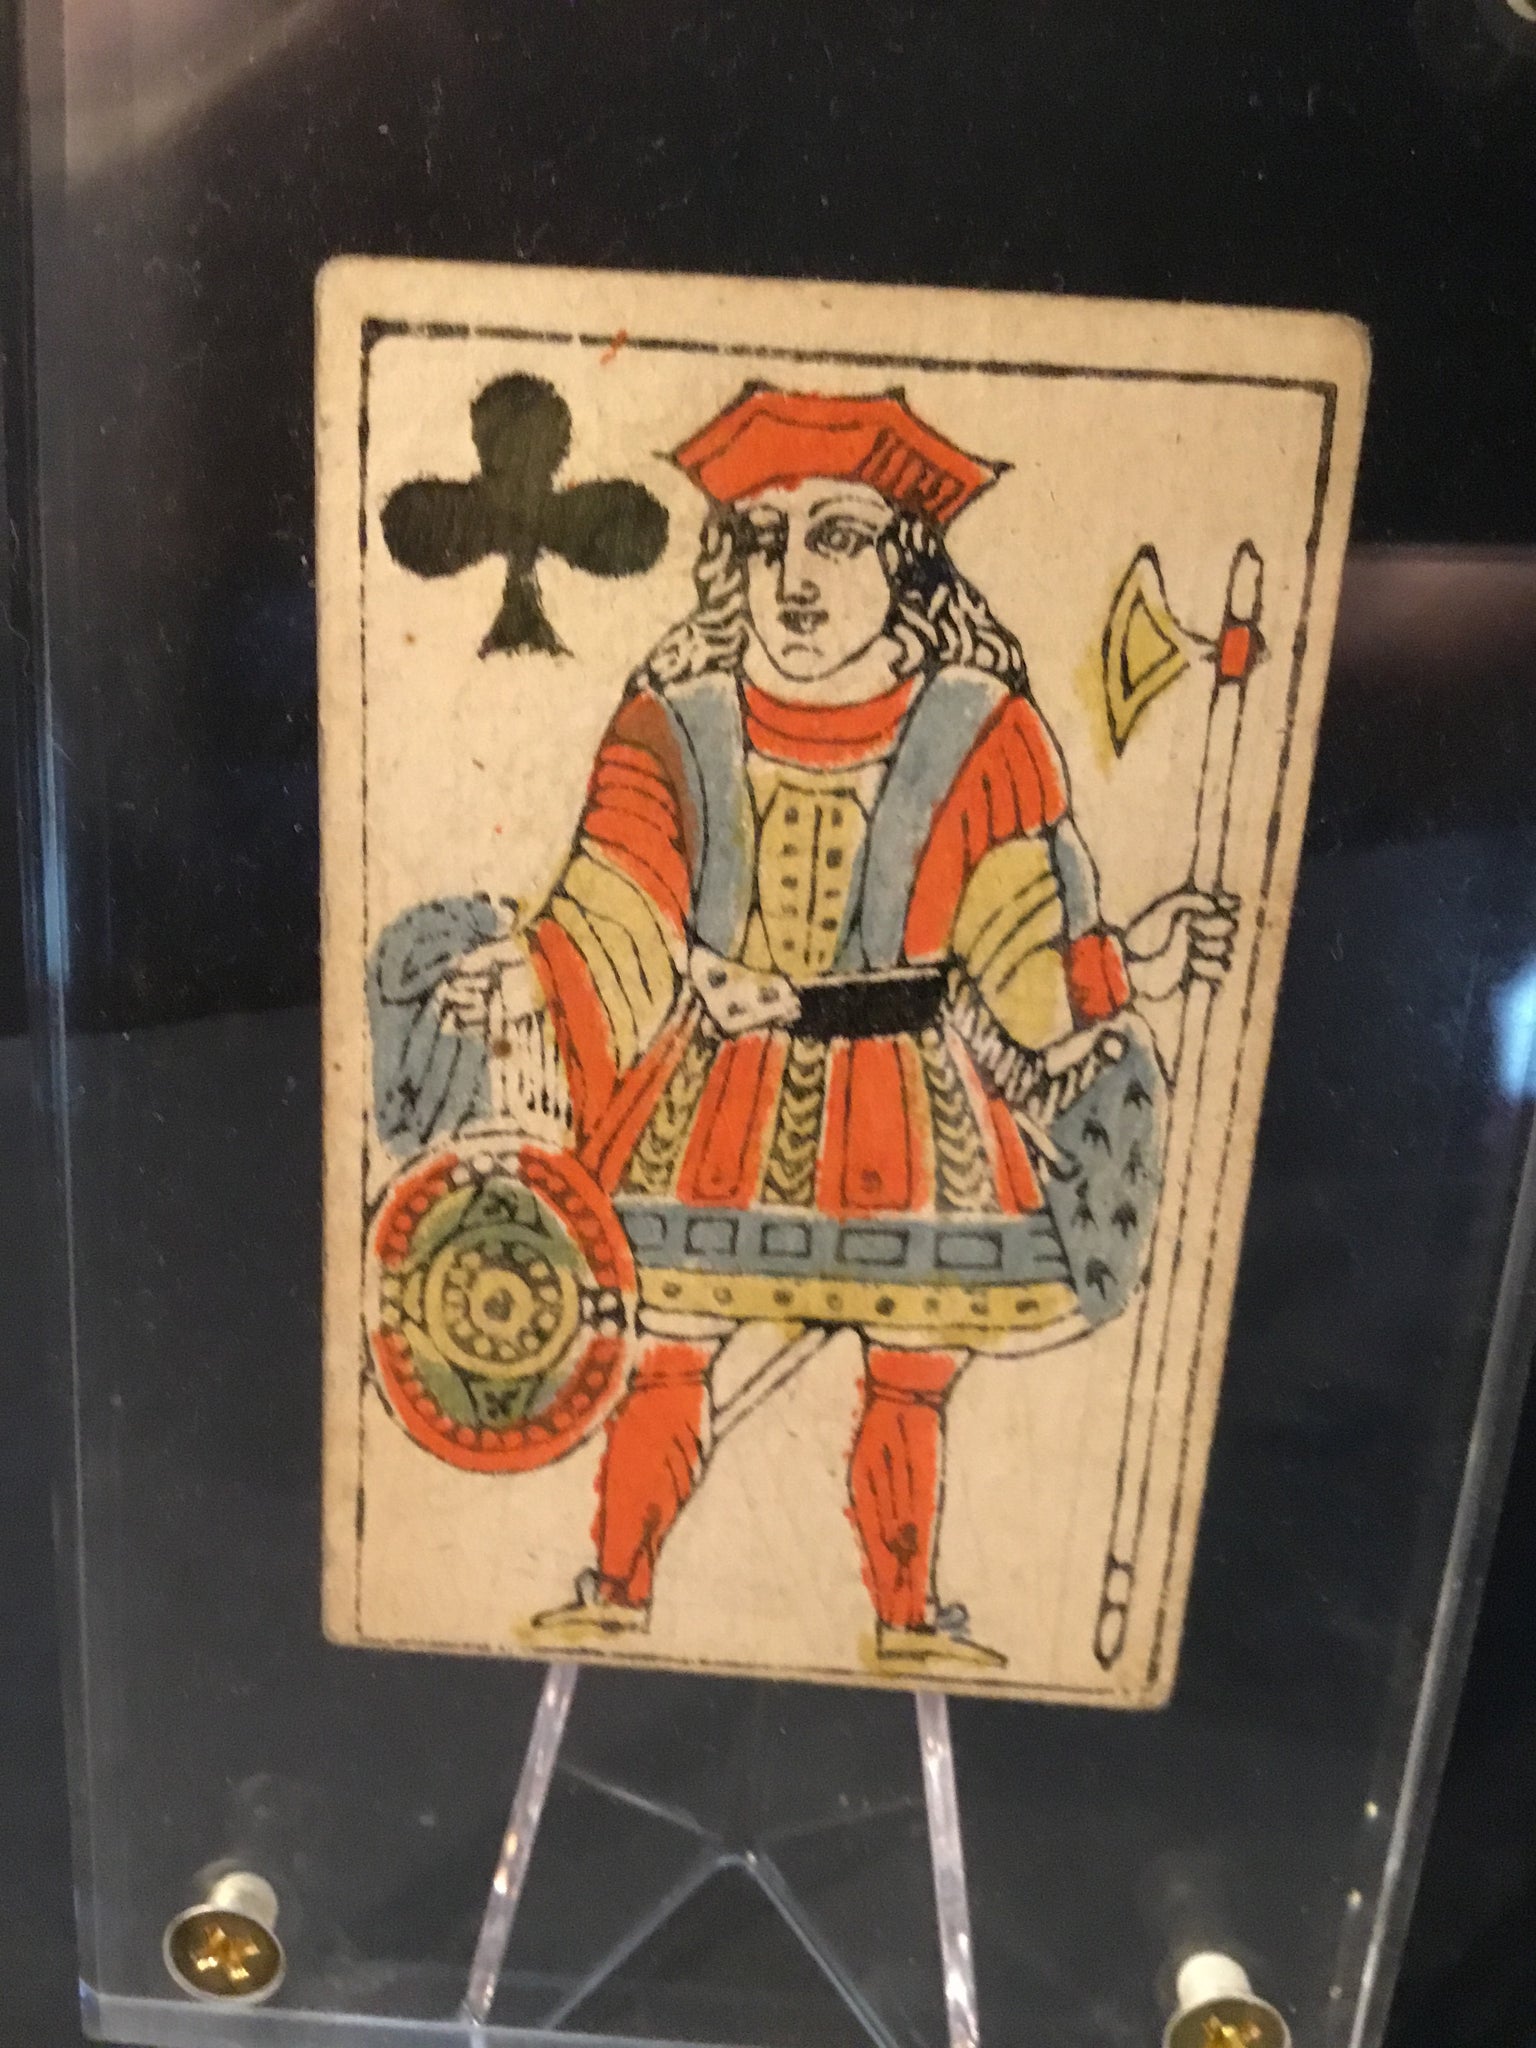 17th century playing cards that were fit for a king